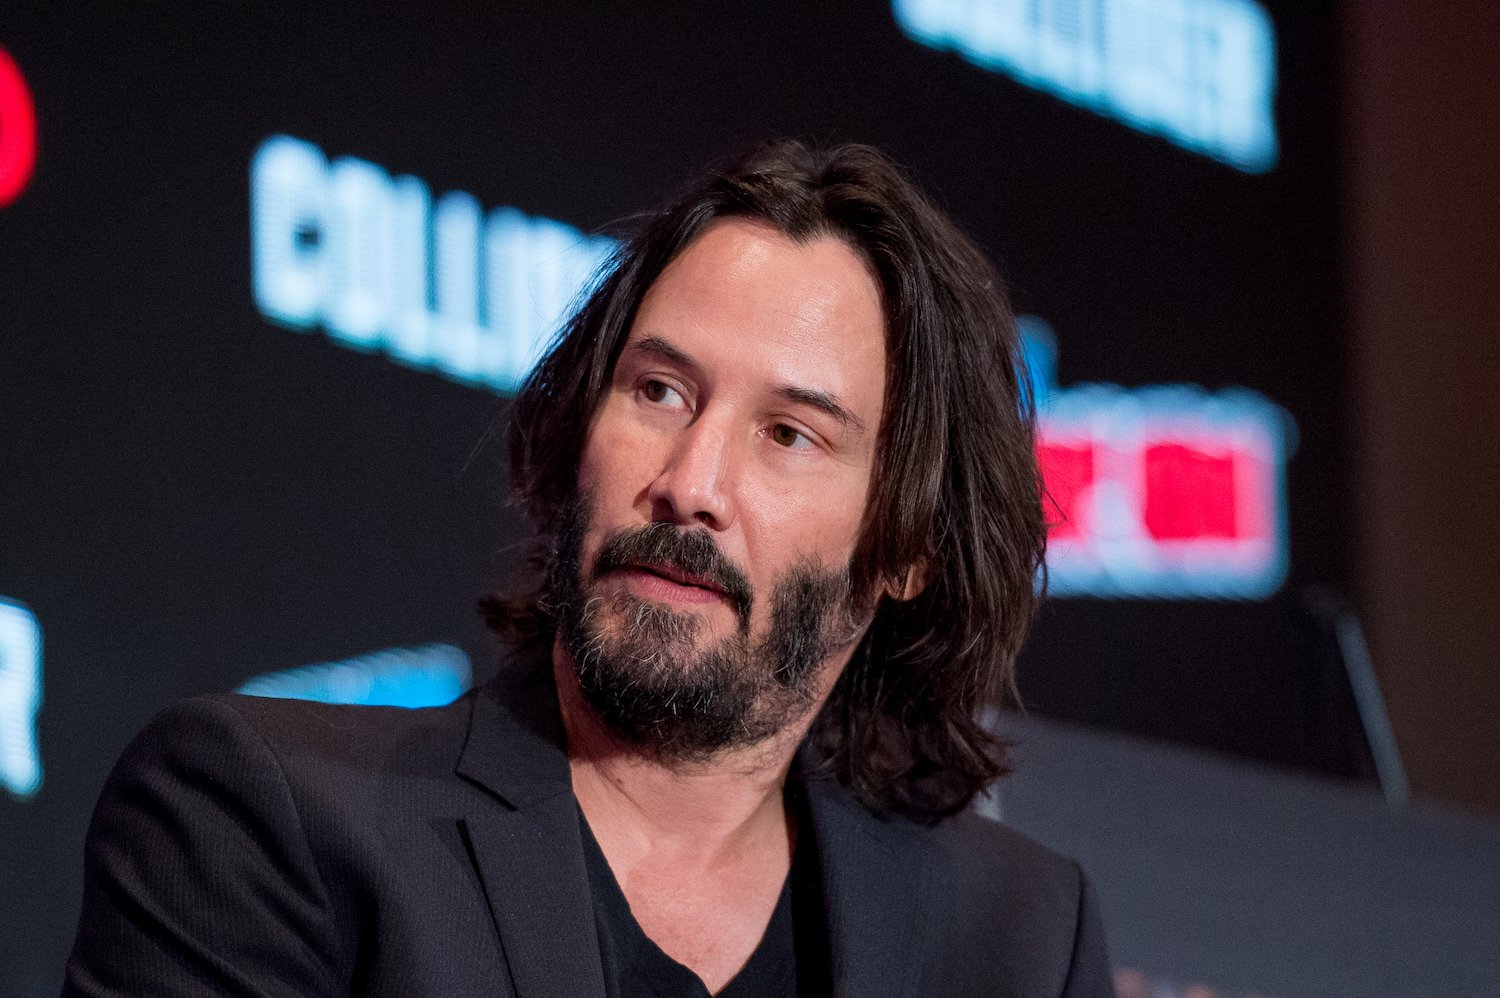 Keanu Reeves discusses 'Replicas' during 2017 New York Comic Con